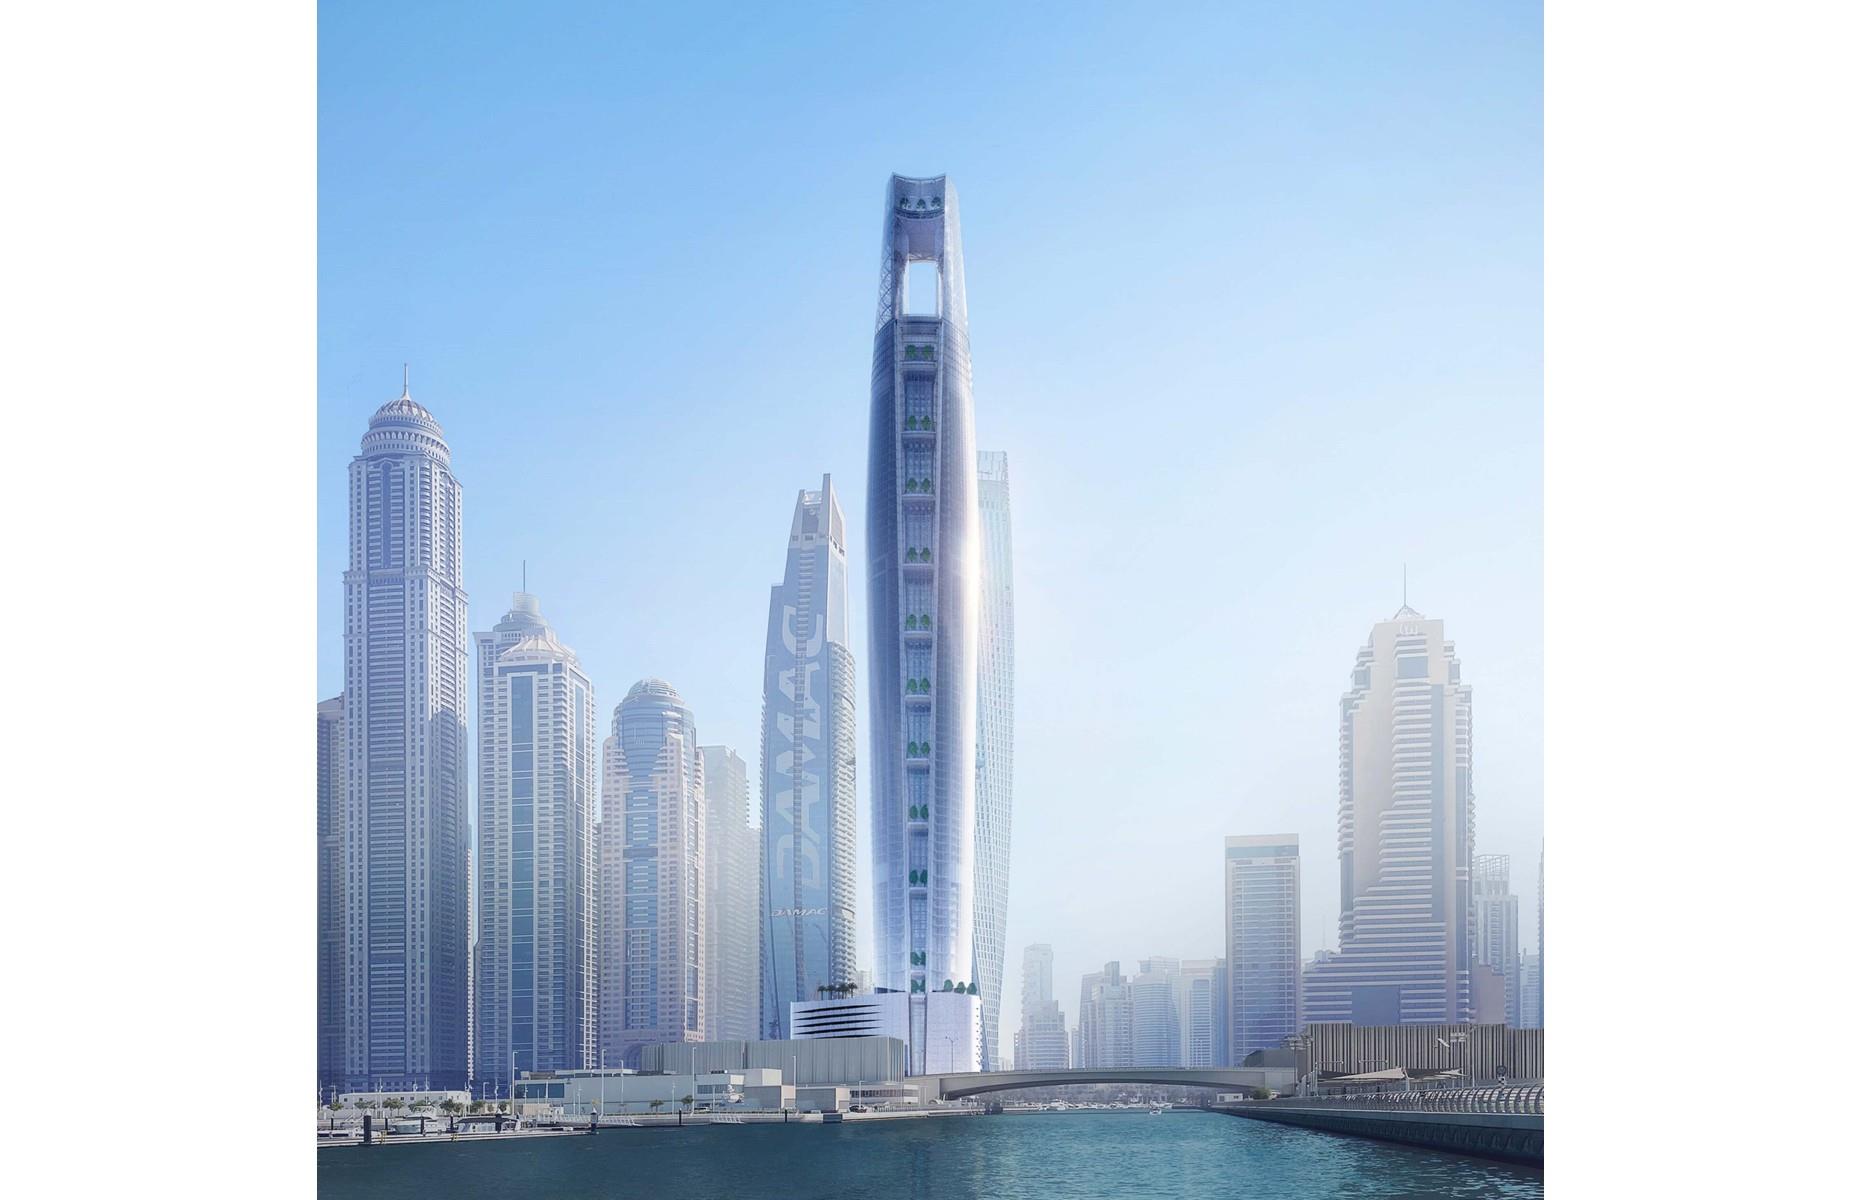 <p><a href="https://www.skyscrapercenter.com/building/ciel-tower/34561">Set for completion in 2023</a>, Ciel Tower will be the tallest hotel in the world at an eye-popping 1,199 feet (366m). This gargantuan skyscraper, designed by London architecture firm NORR, will grace the glitzy Dubai Marina, with a glass observation deck providing sweeping views across the Palm Jumeirah and out towards the Arabian Gulf.</p>